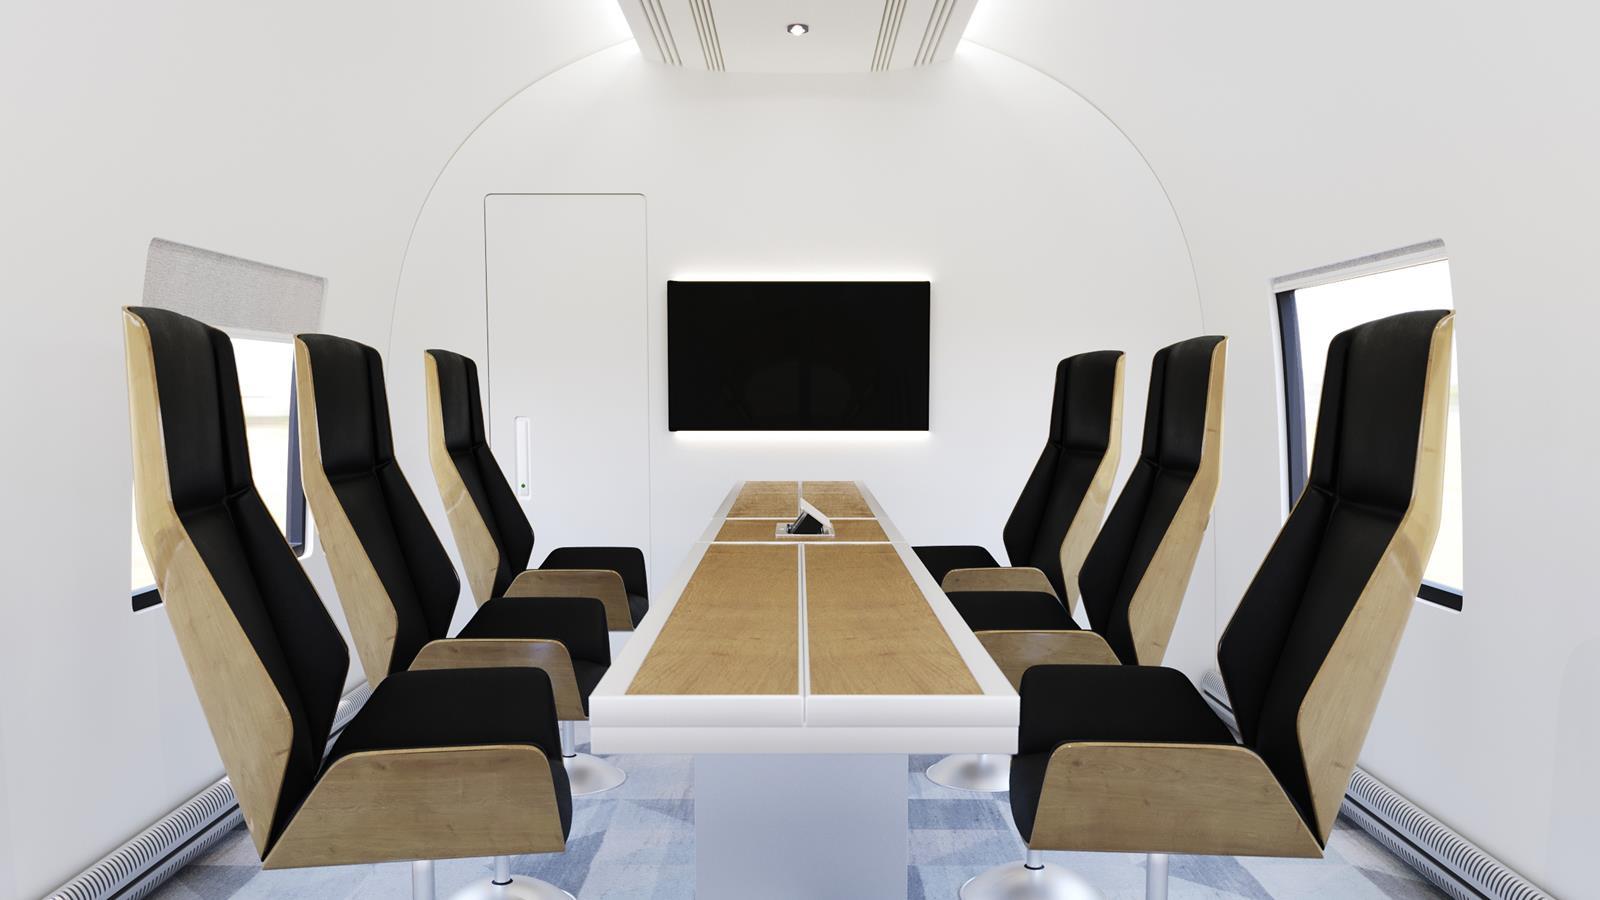 An area for business travellers could provide a meeting room with teleconferencing facilities and presentation screen.